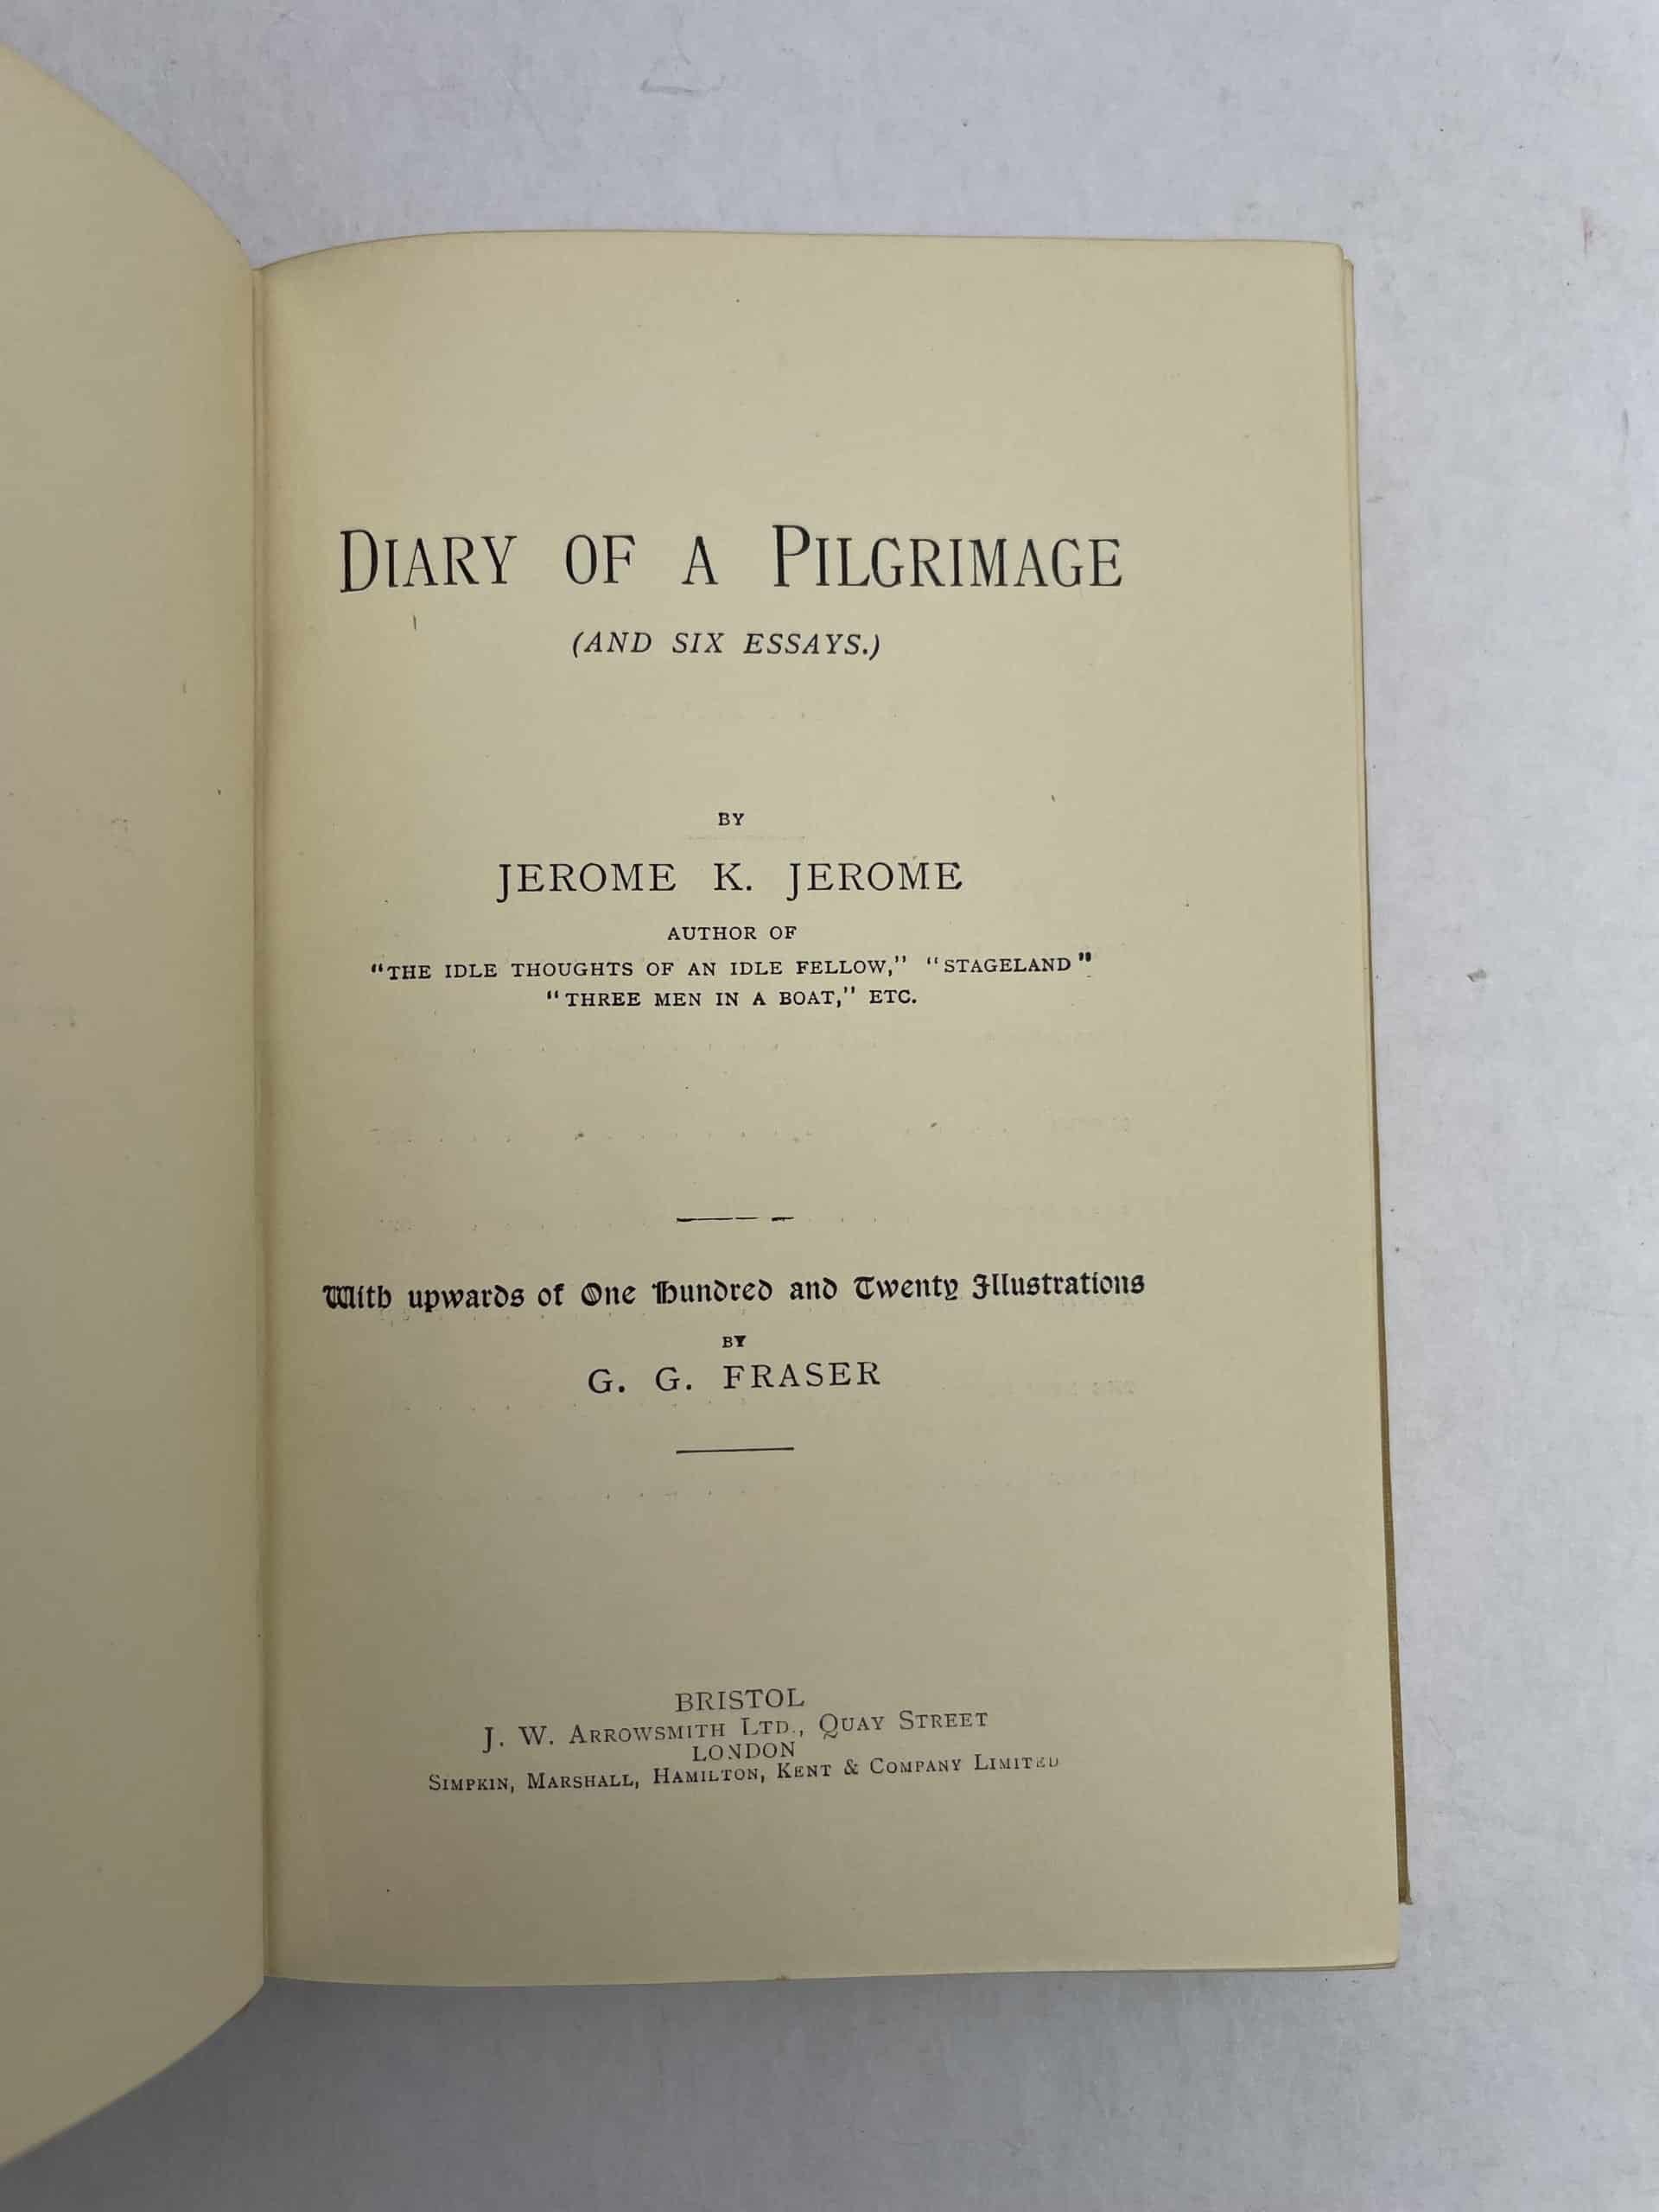 jerome k jerome the diary of a pilgrimage first edition 85 2